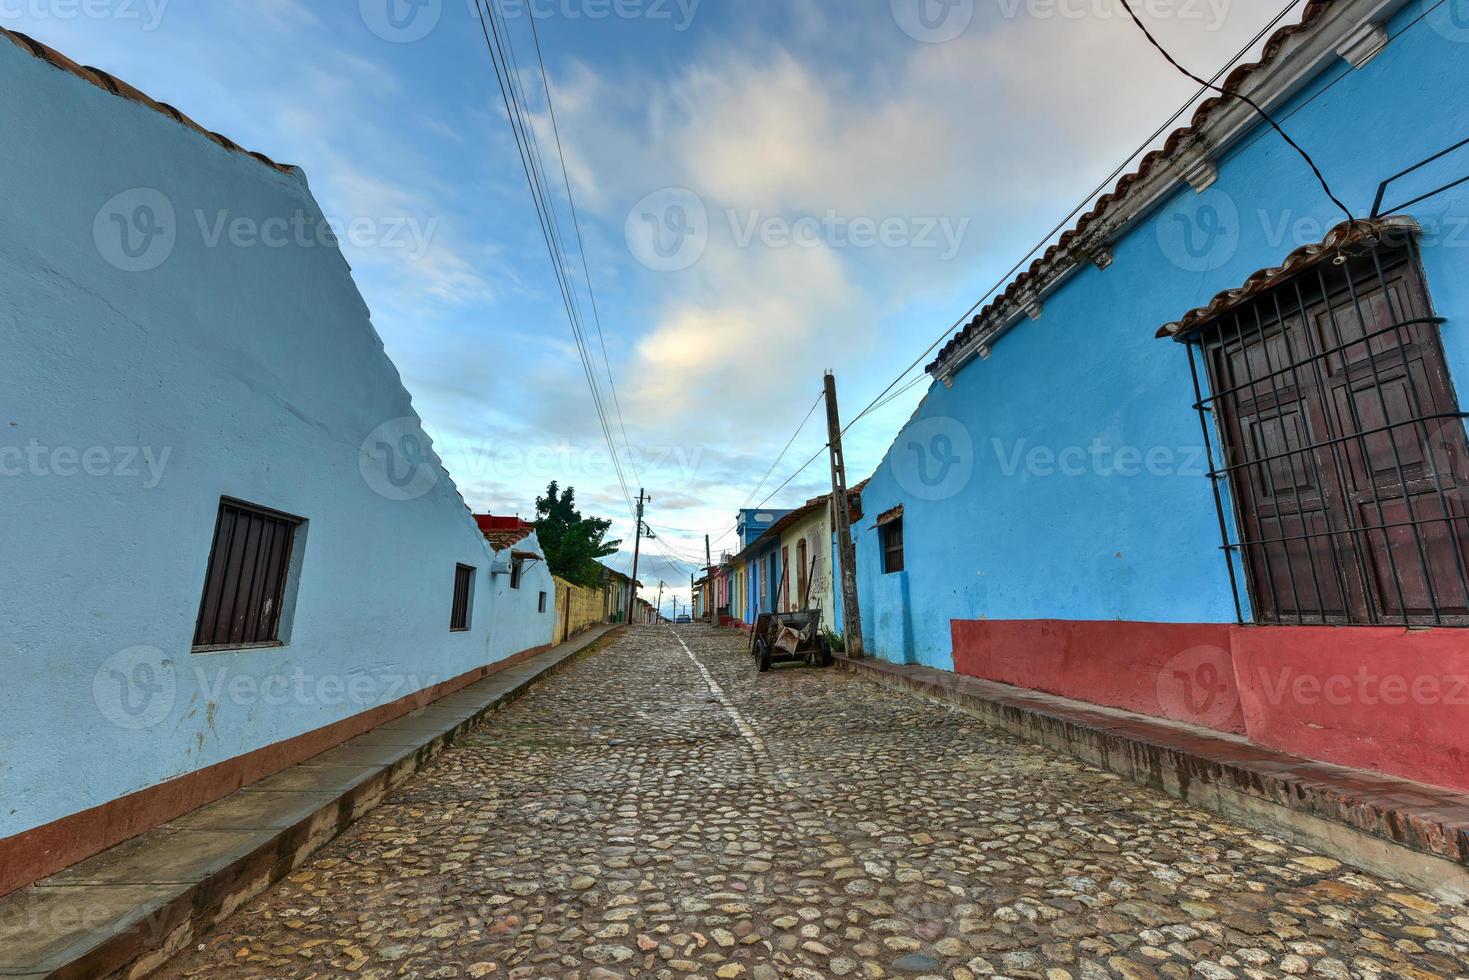 Colorful traditional houses in the colonial town of Trinidad in Cuba, a UNESCO World Heritage site. photo